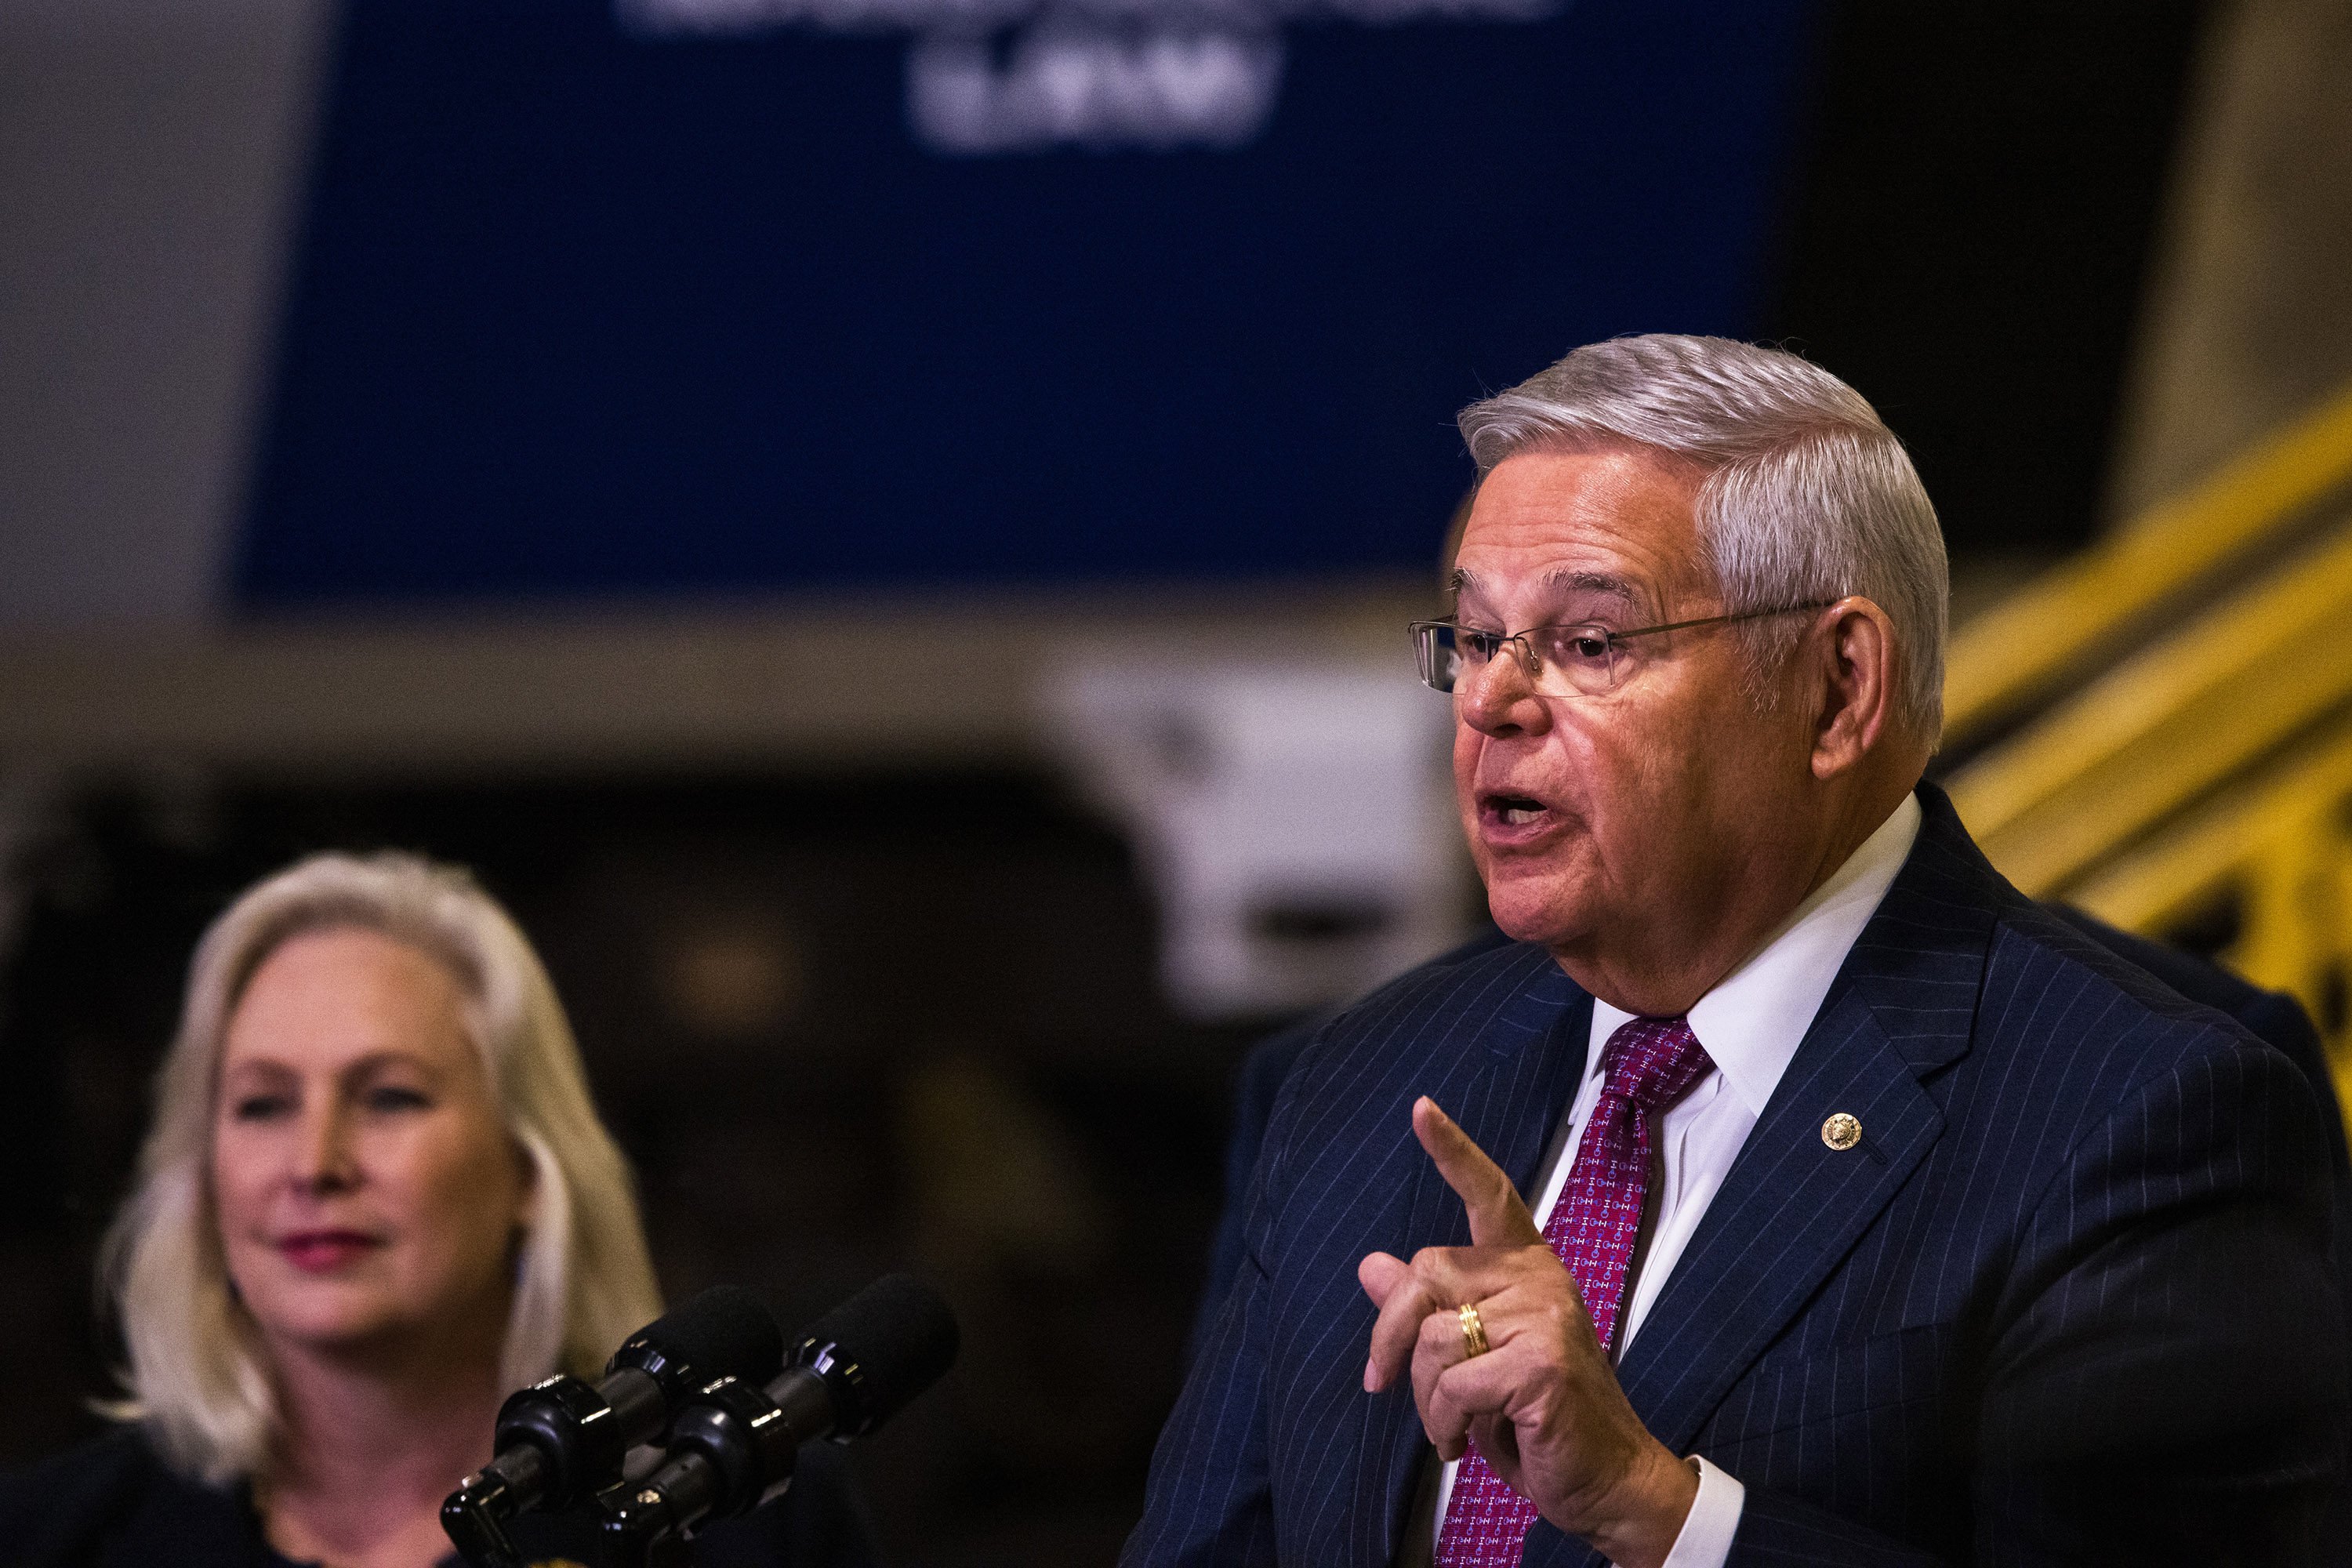 US Senator Bob Menendez has called for an economic alliance of “like-minded countries” that can respond to adversaries. Photo: Getty Images/TNS